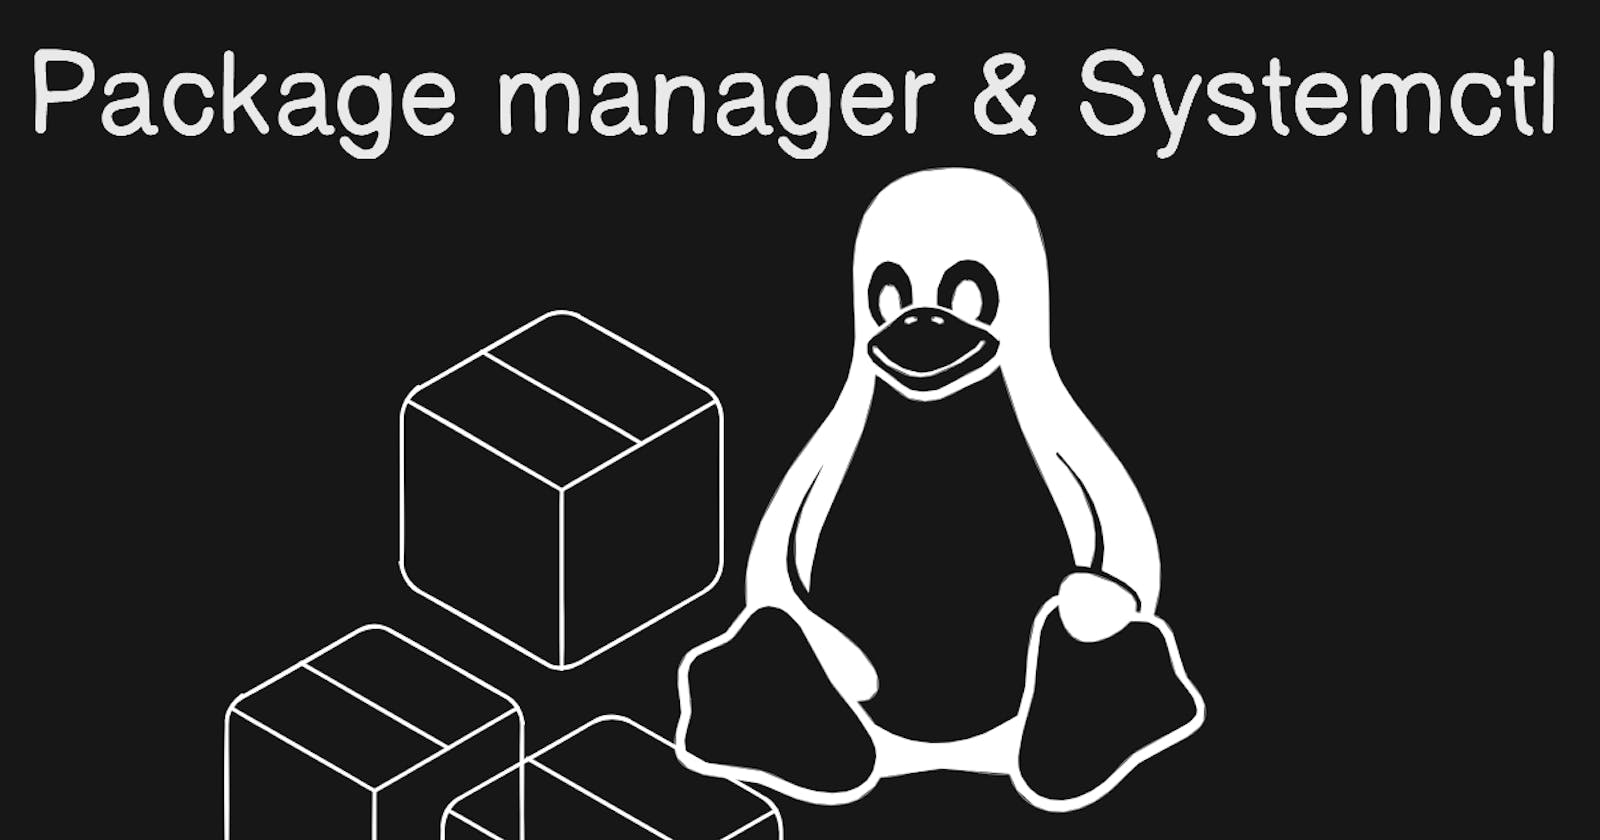 Day 7  Task
Understanding package manager and systemctl